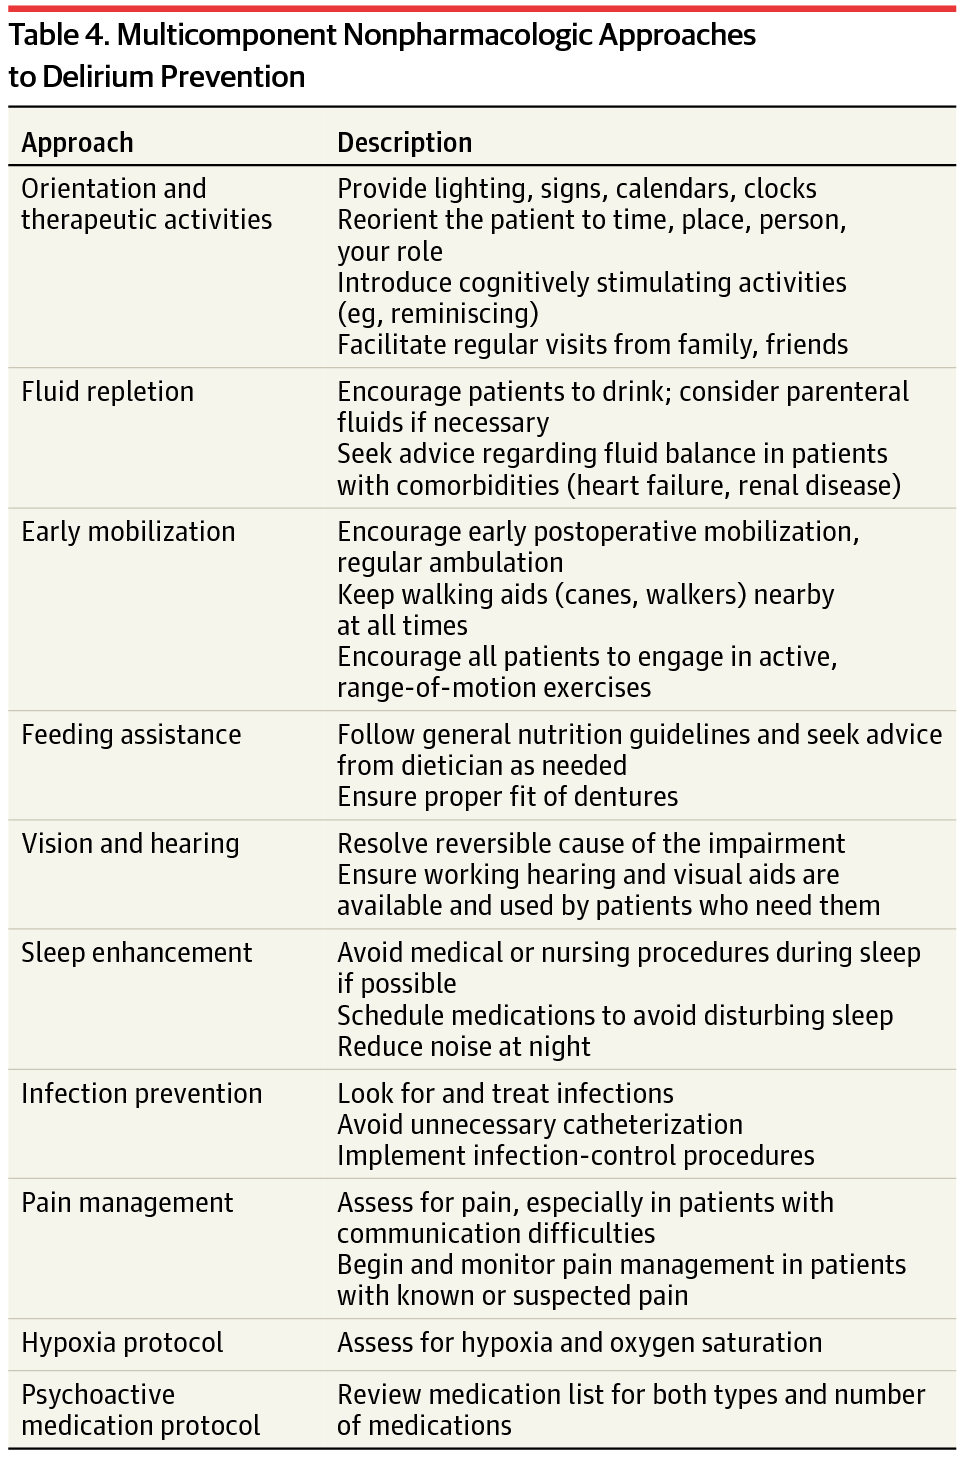 Practice guideline for the treatment of patients with delirium